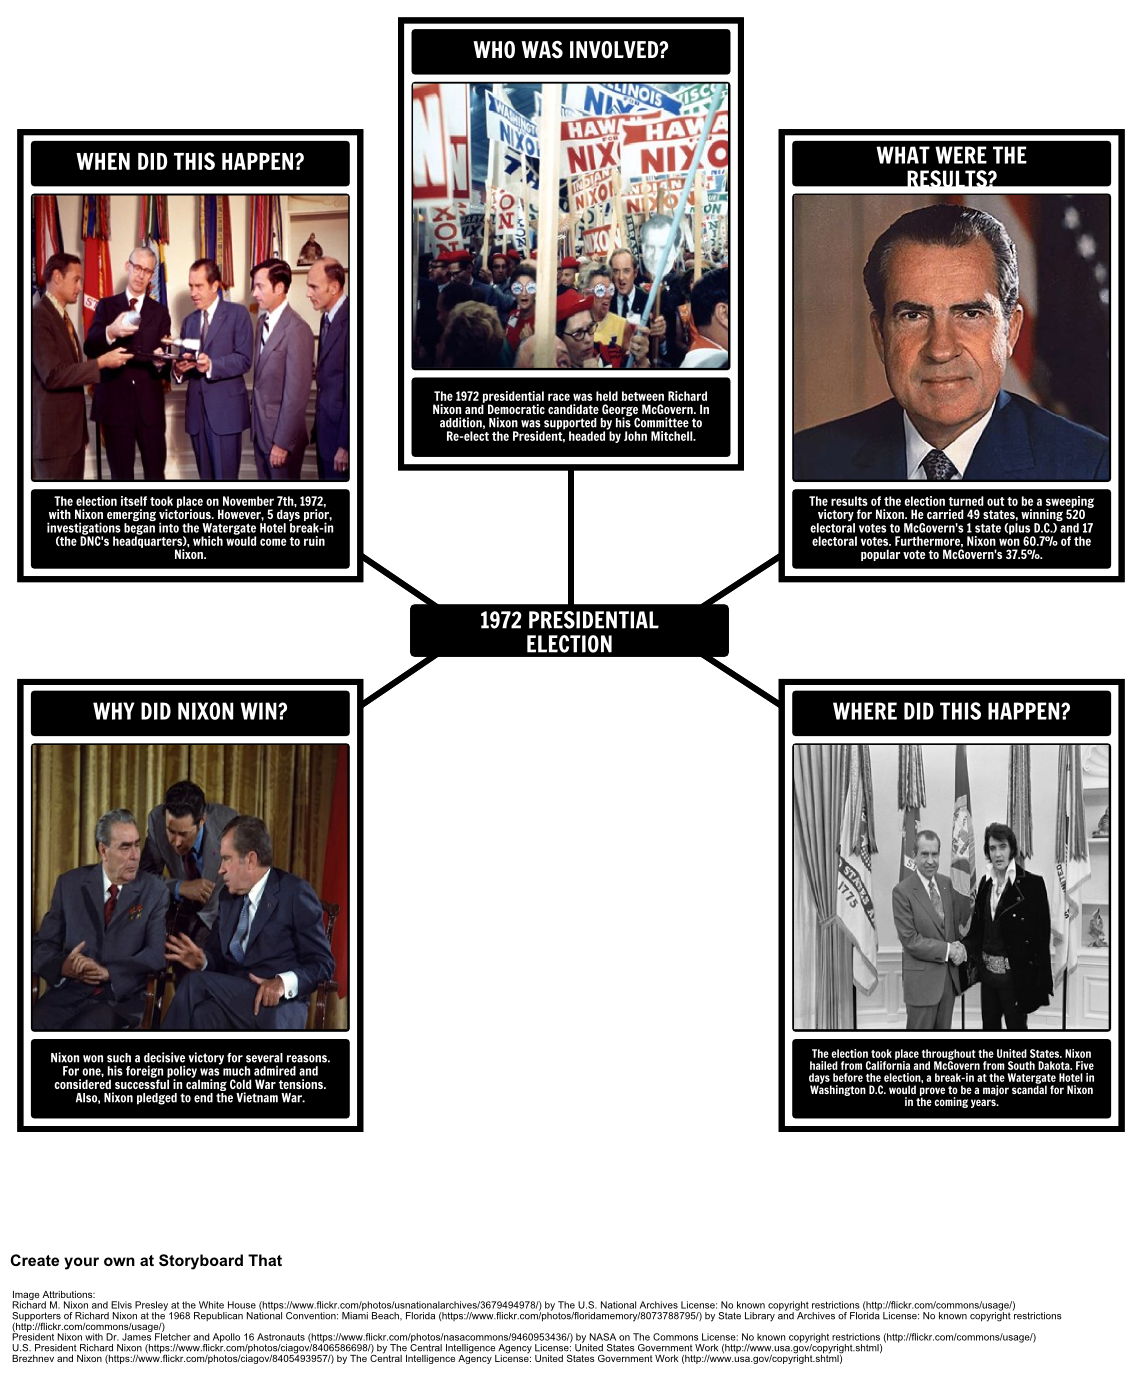 The Presidency of Richard Nixon - 5 Ws of the 1972 Election